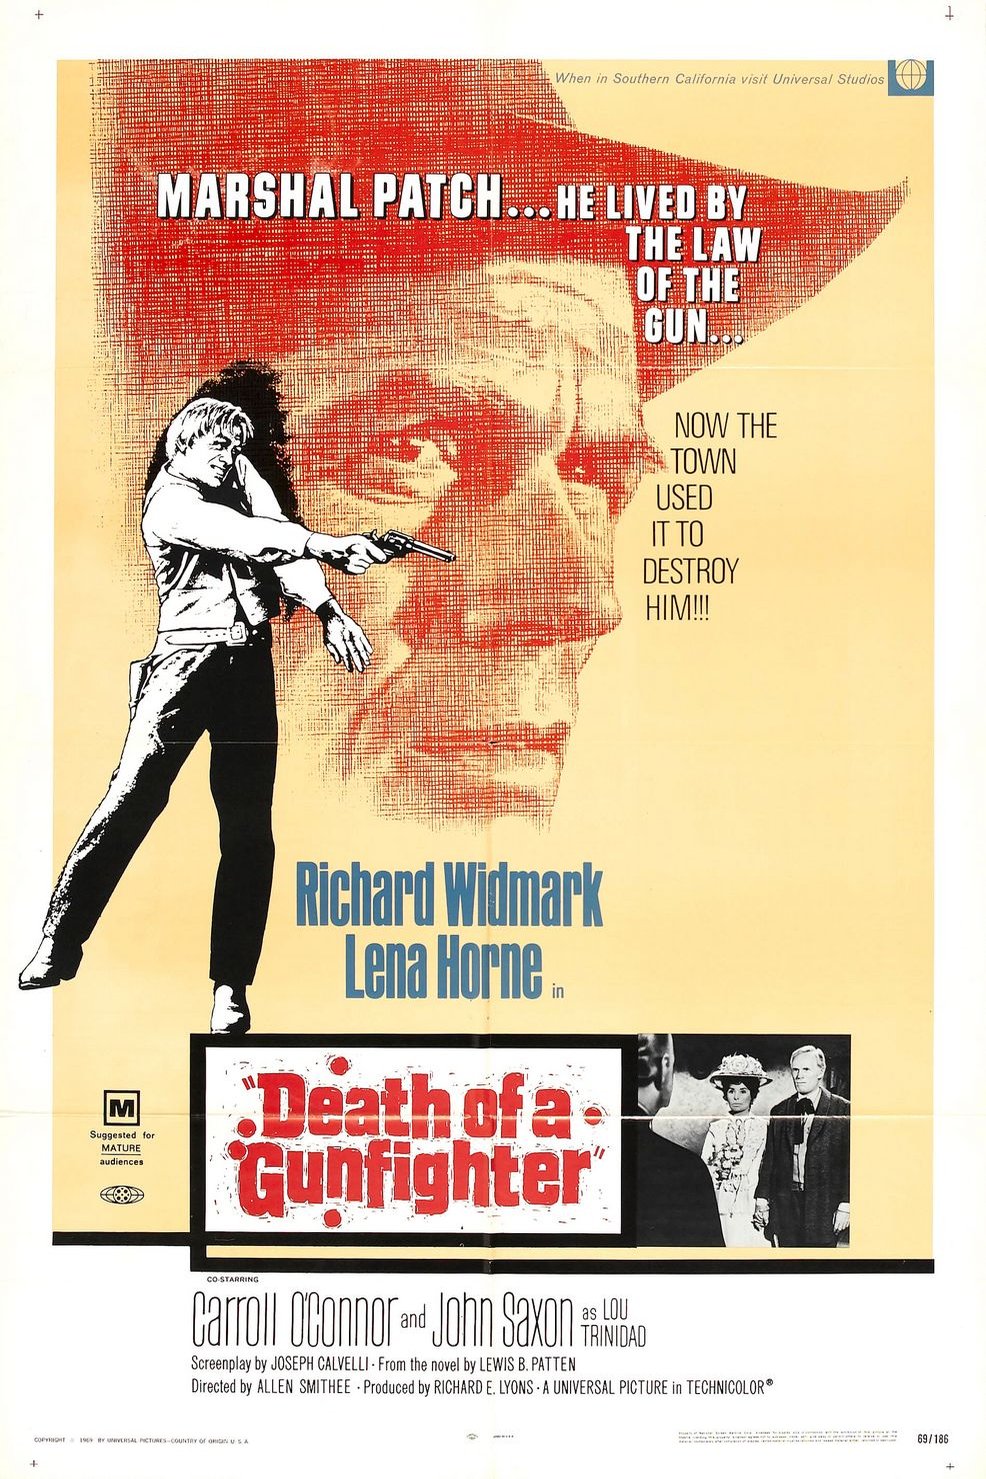 Poster of the movie Death of a Gunfighter